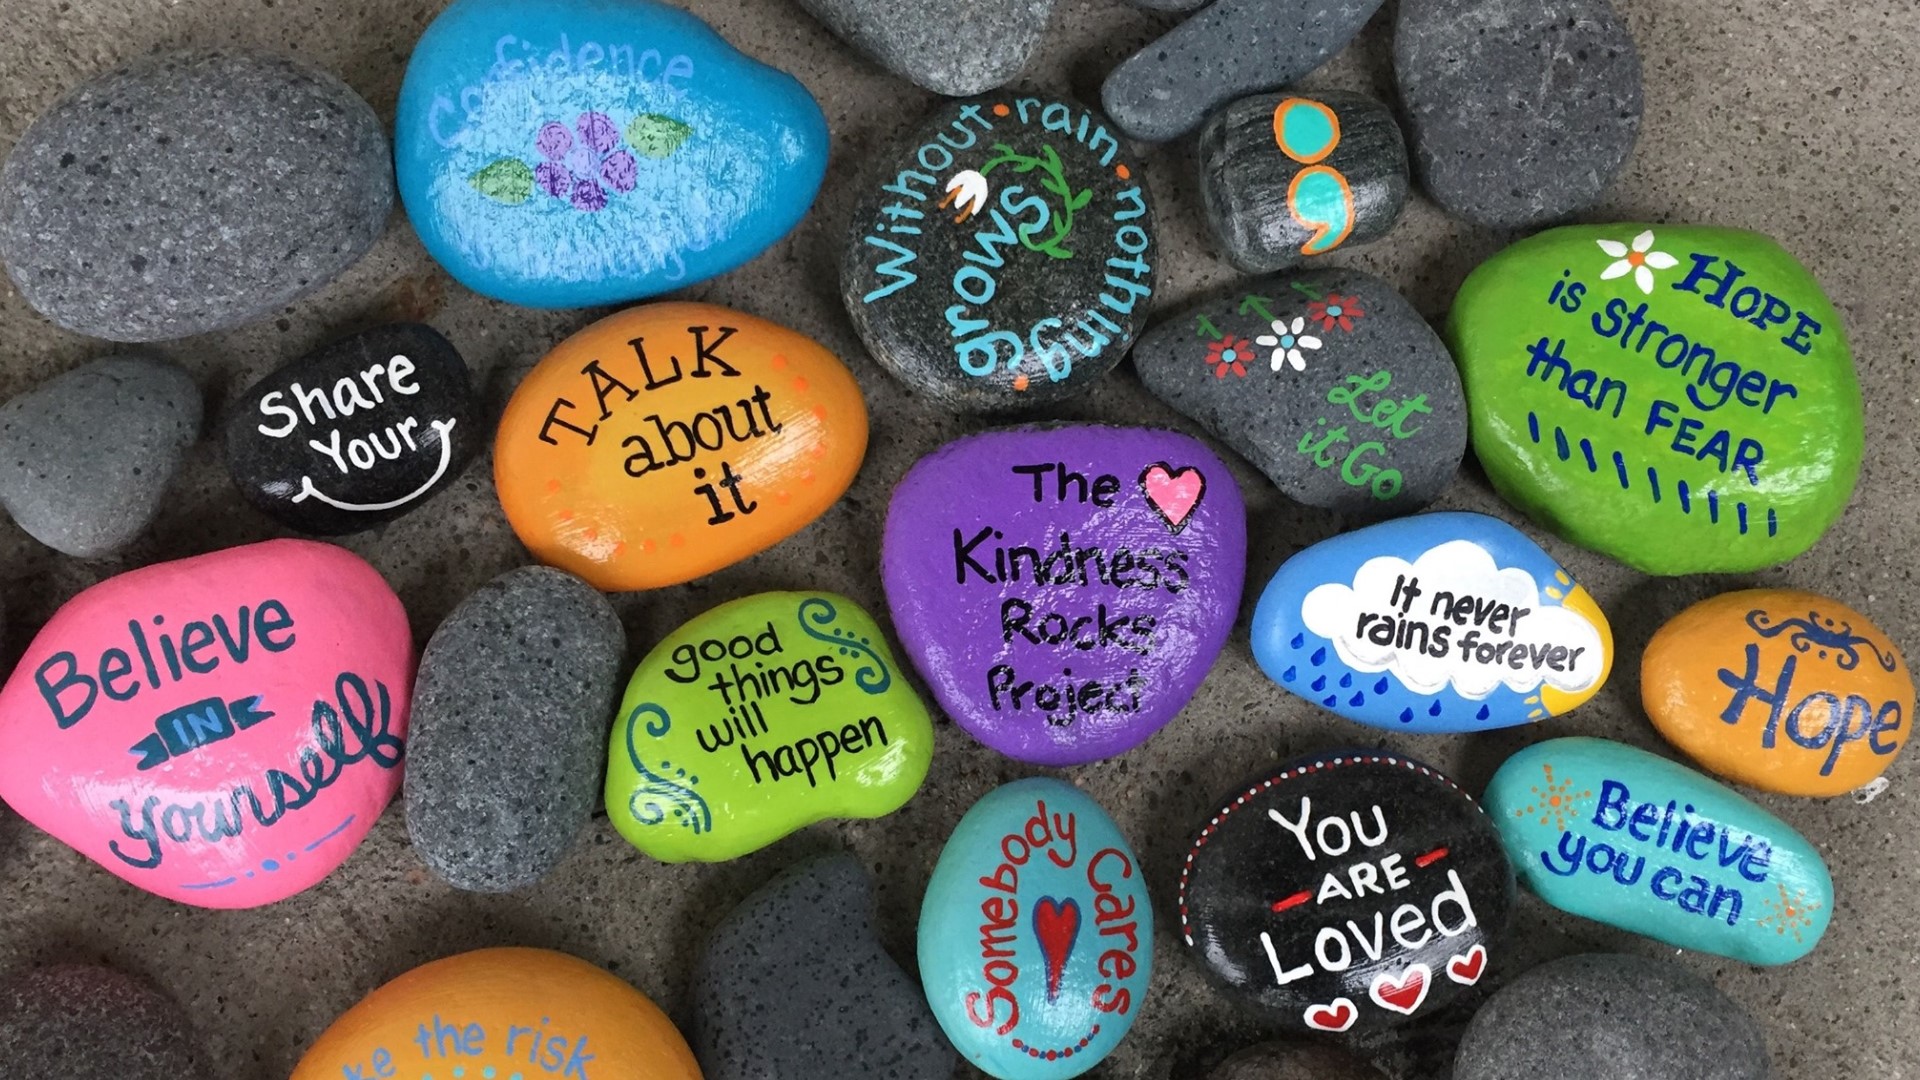 What started as a fun pastime of painting rocks to leave in her community, has become a movement that's getting everyone involved.